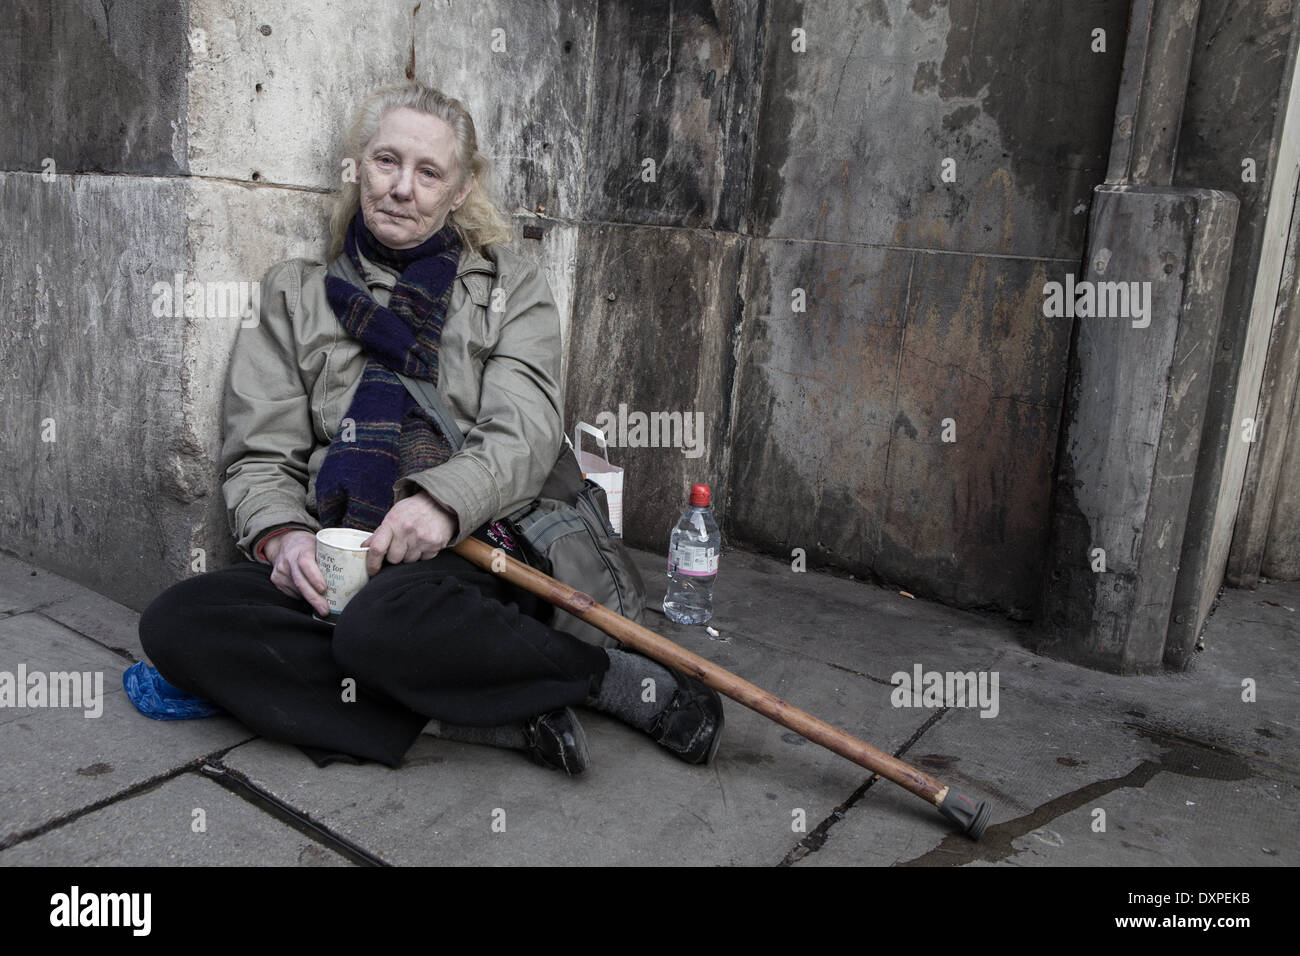 Homeless woman on the streets of London. Stock Photo